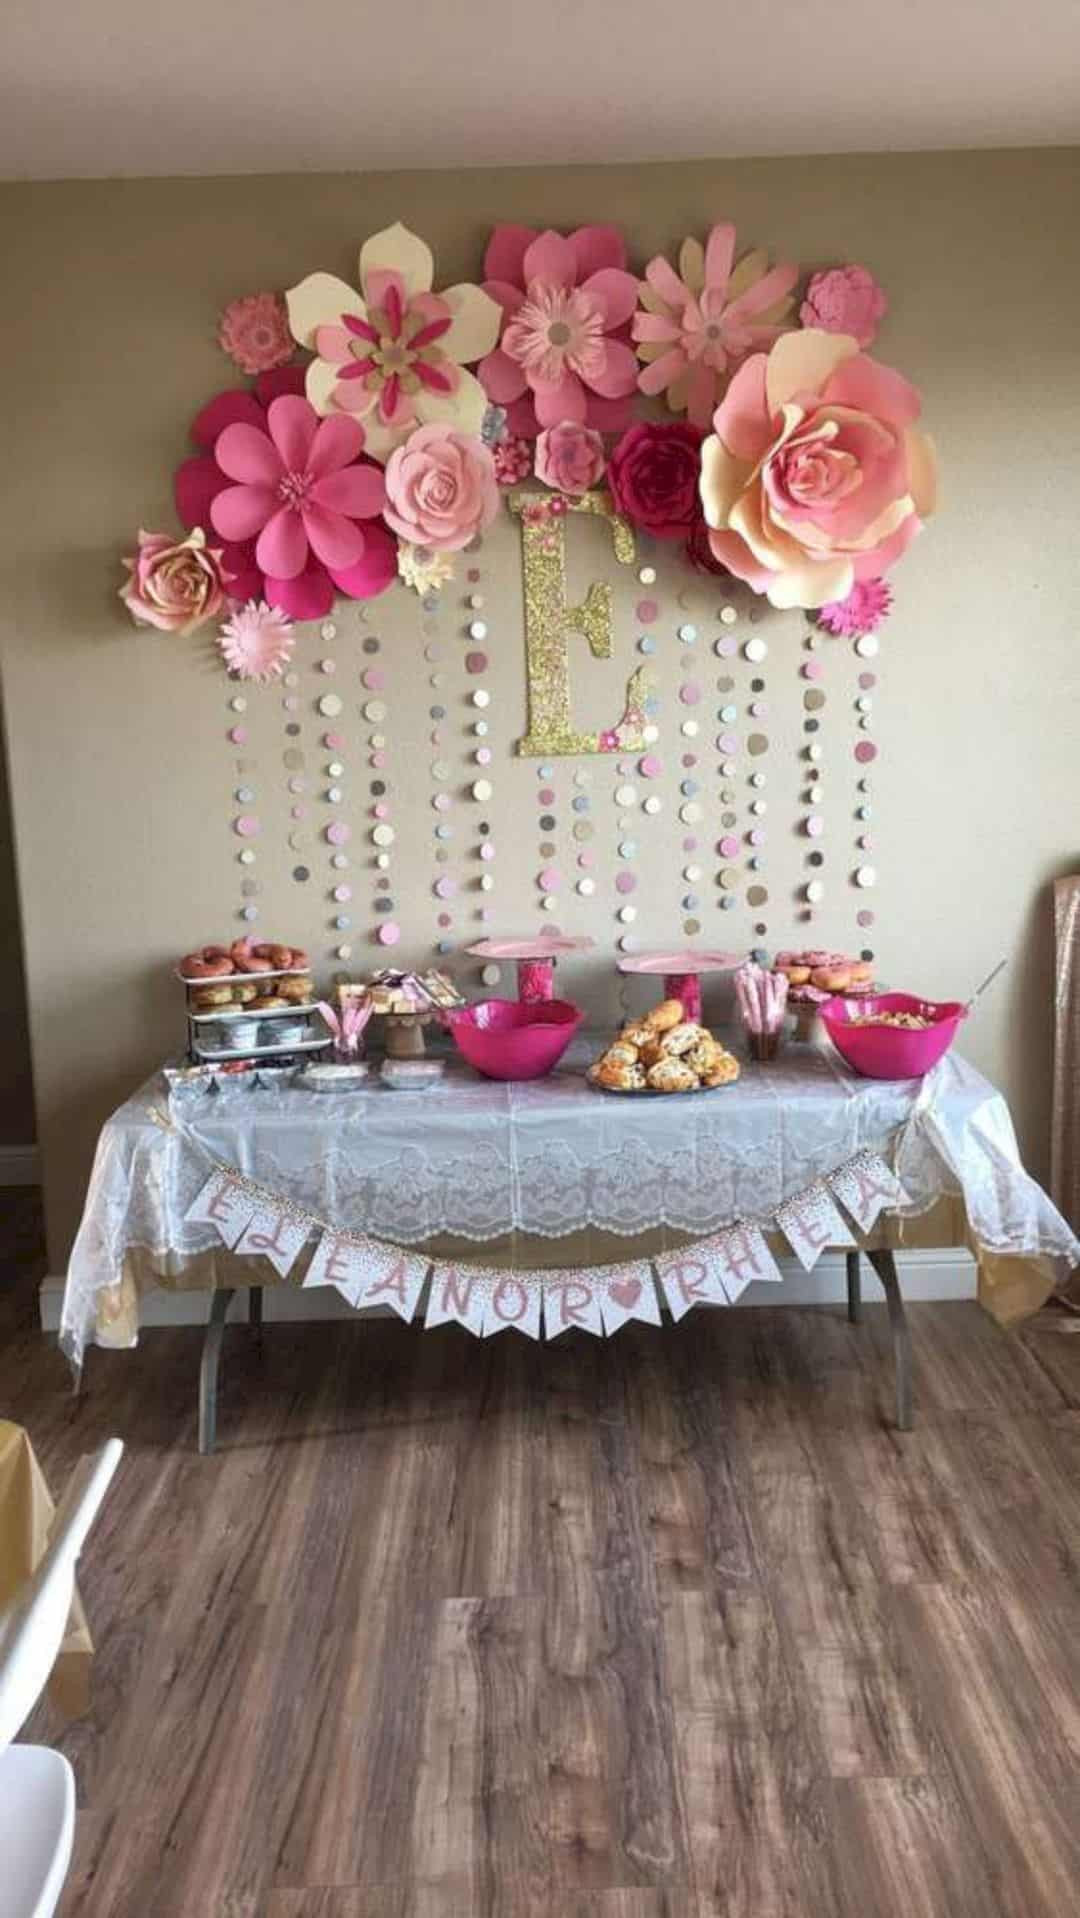 Baby Shower Decorations Ideas For A Girl
 16 Cute Baby Shower Decorating Ideas